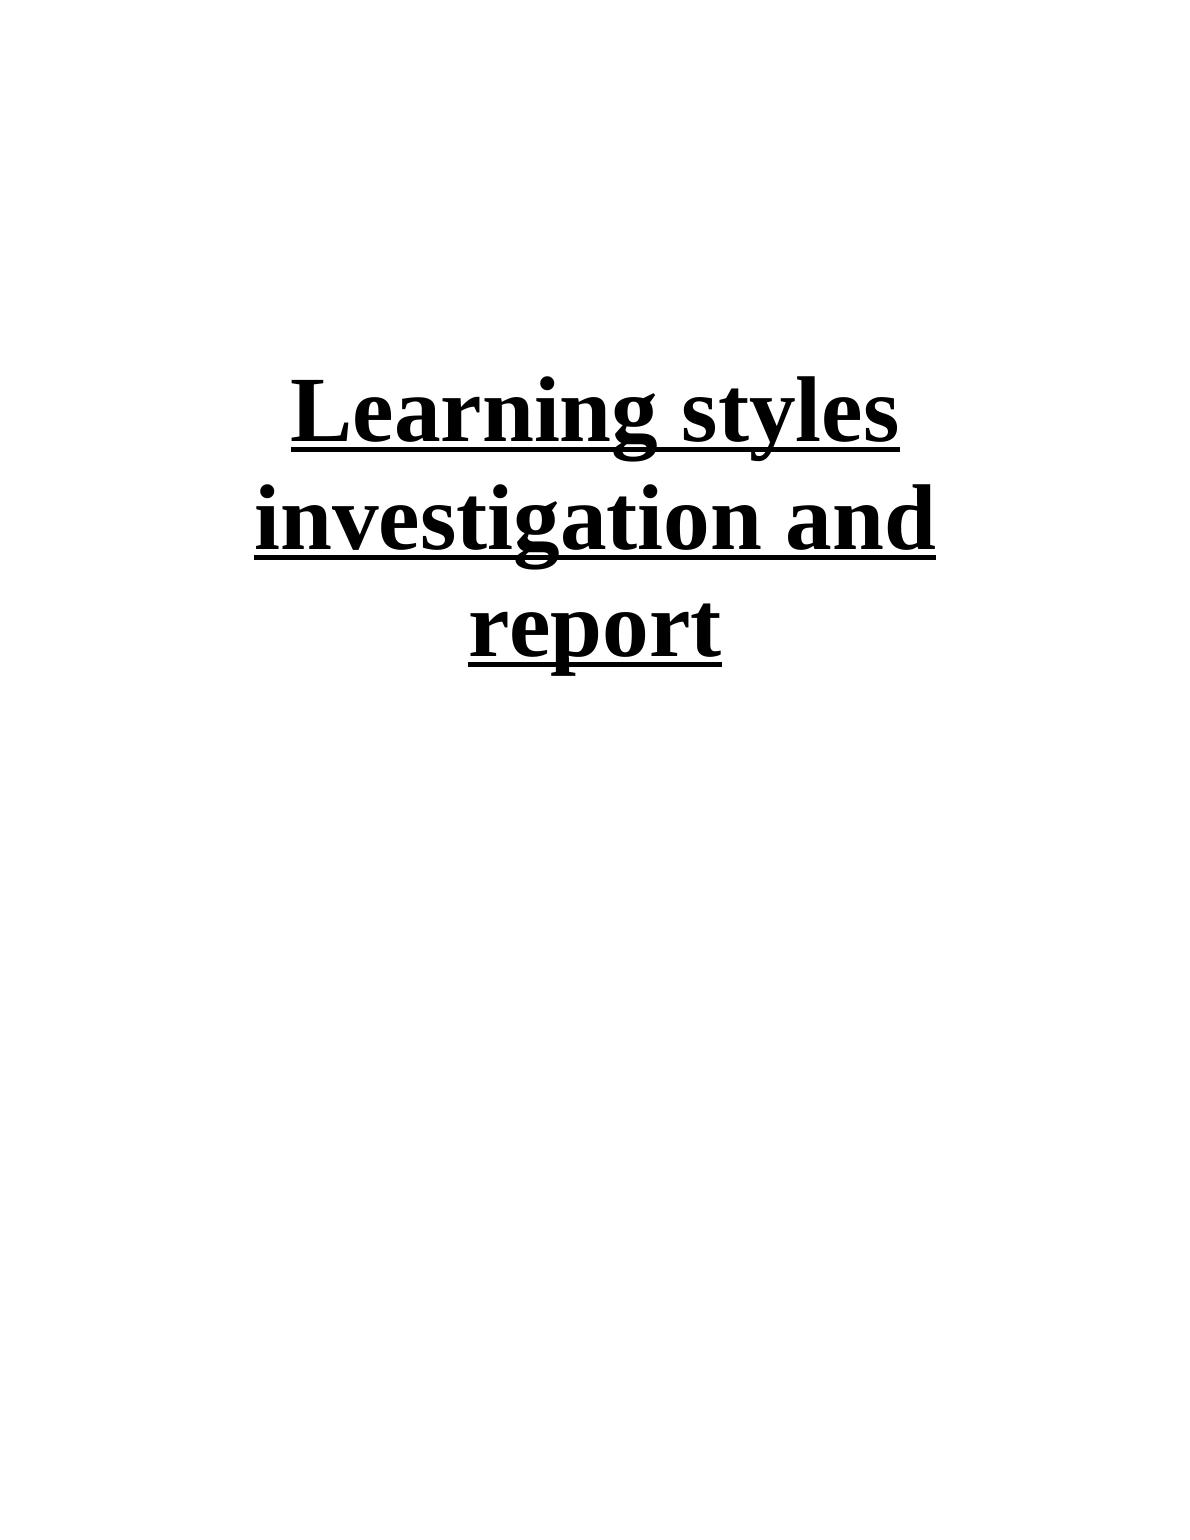 Learning styles investigation and report Assignment_1